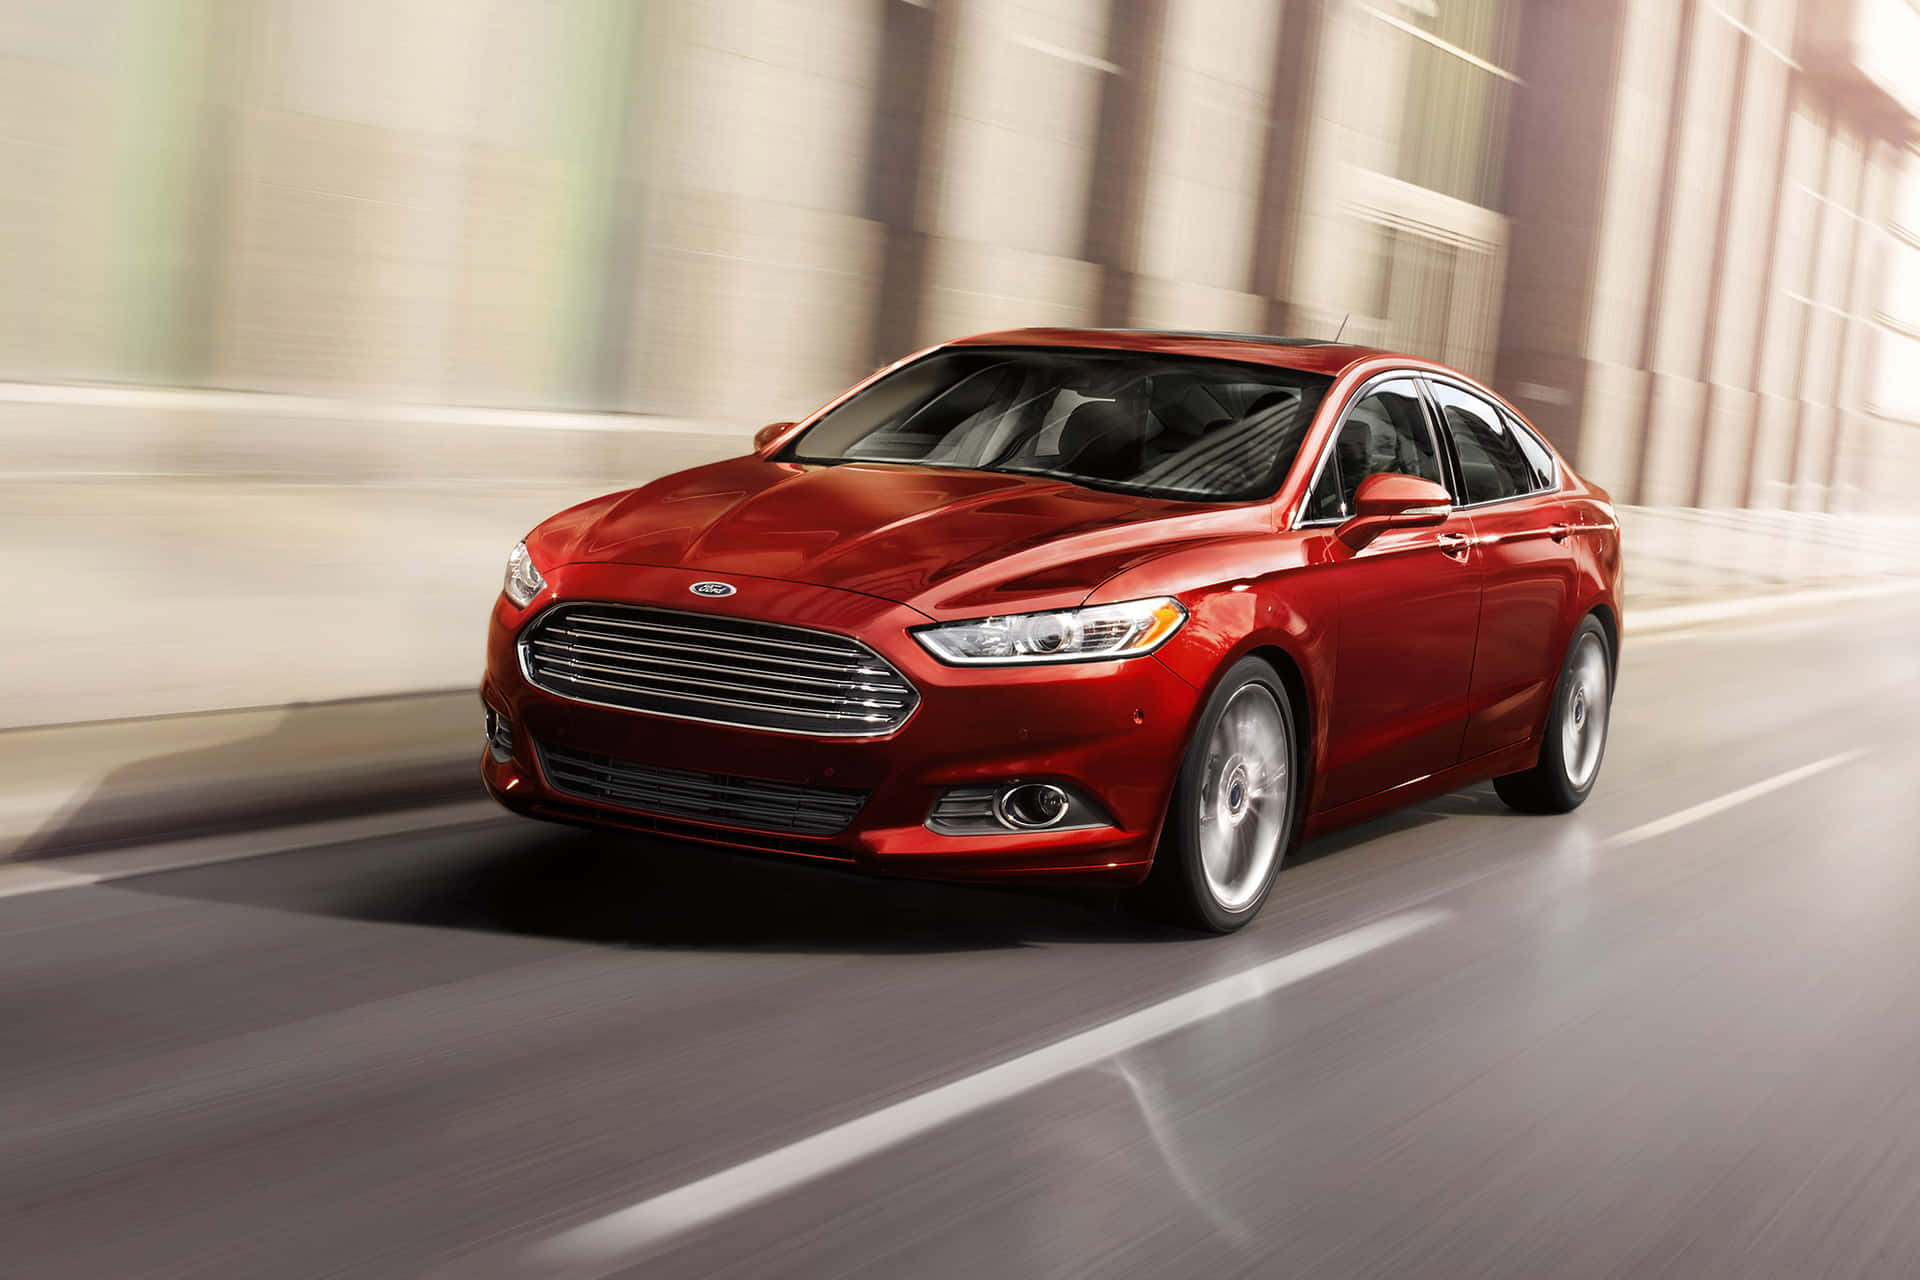 Stylish Ford Fusion on the Road Wallpaper